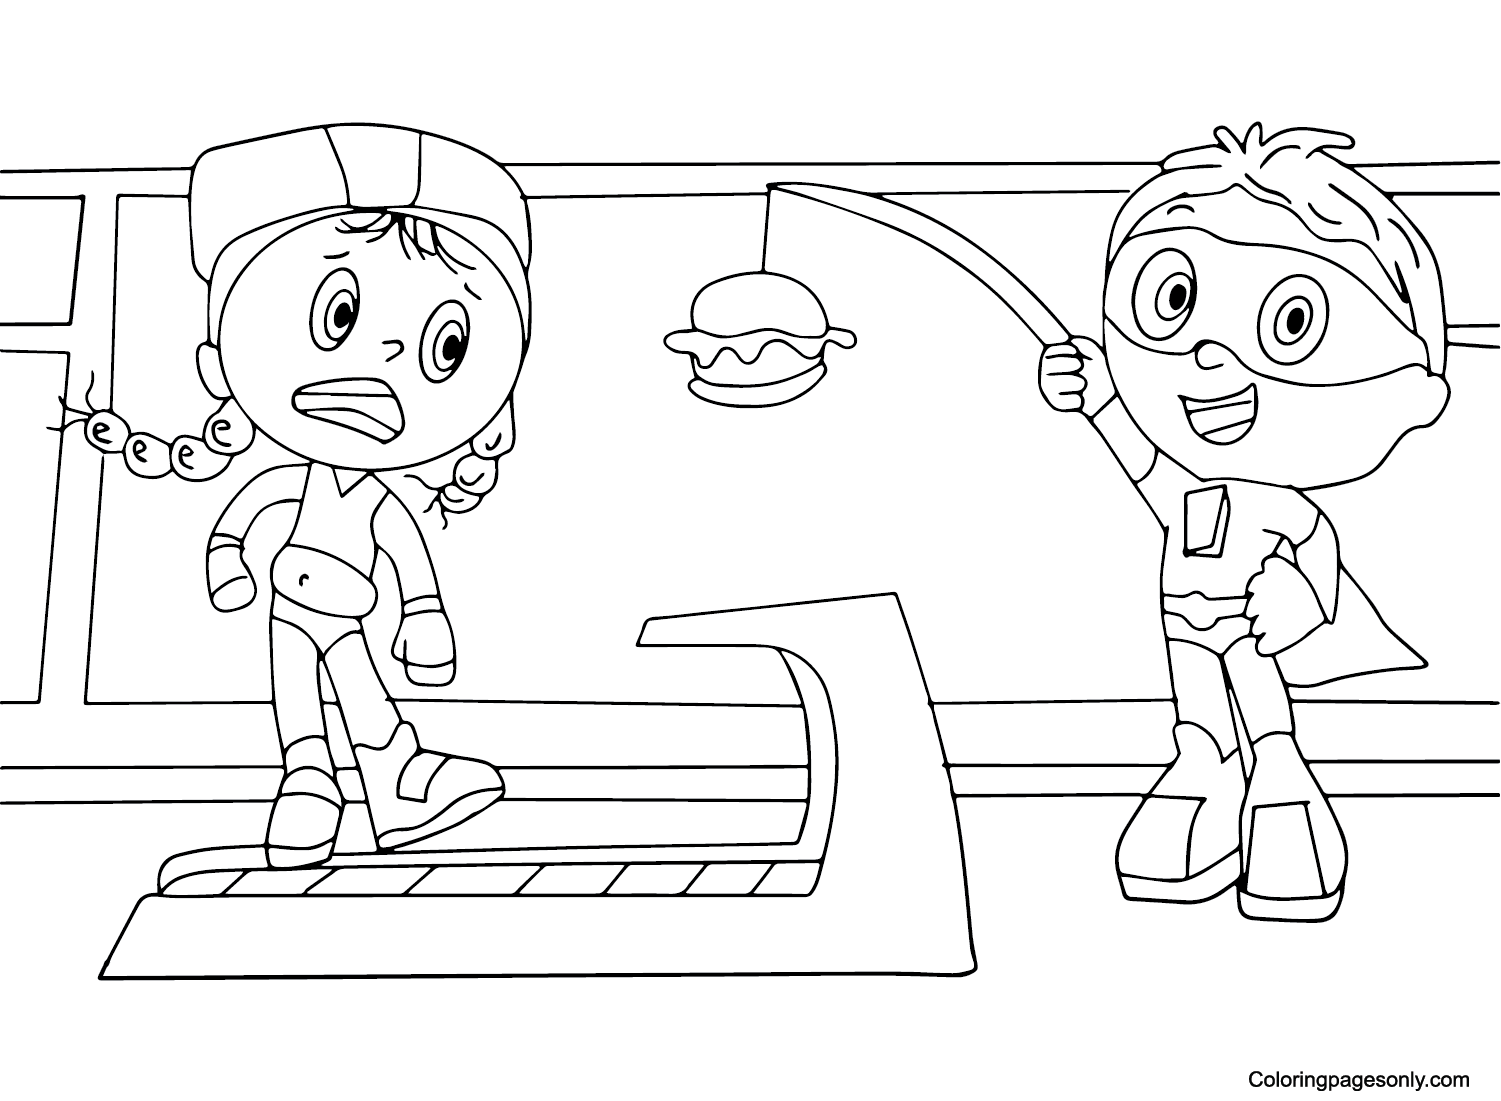 Wonder Red and Super Why Coloring Page